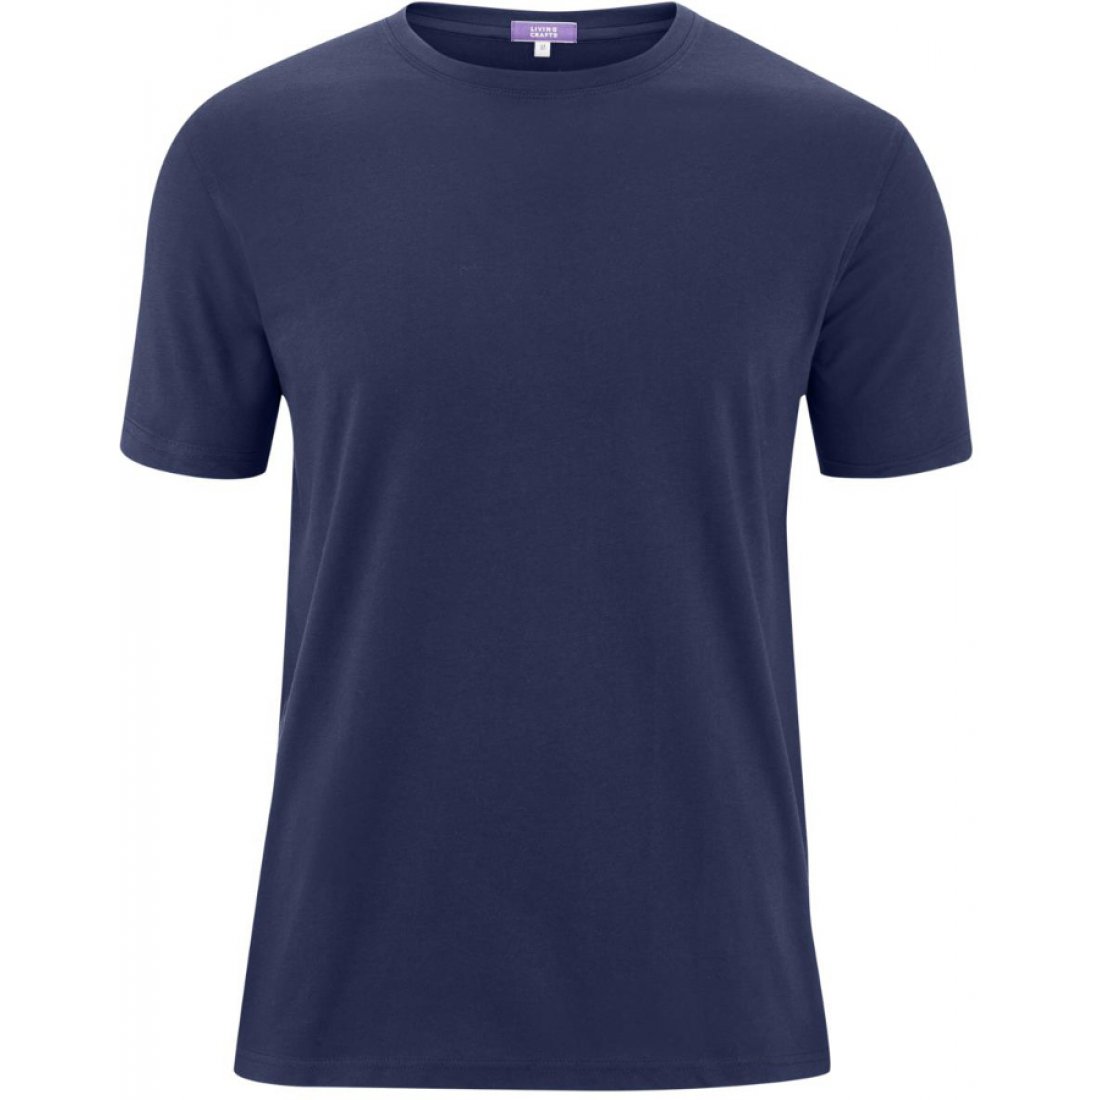 Fabian Organic Cotton T-Shirt - Navy - Pack of 2 - Natural Collection ...